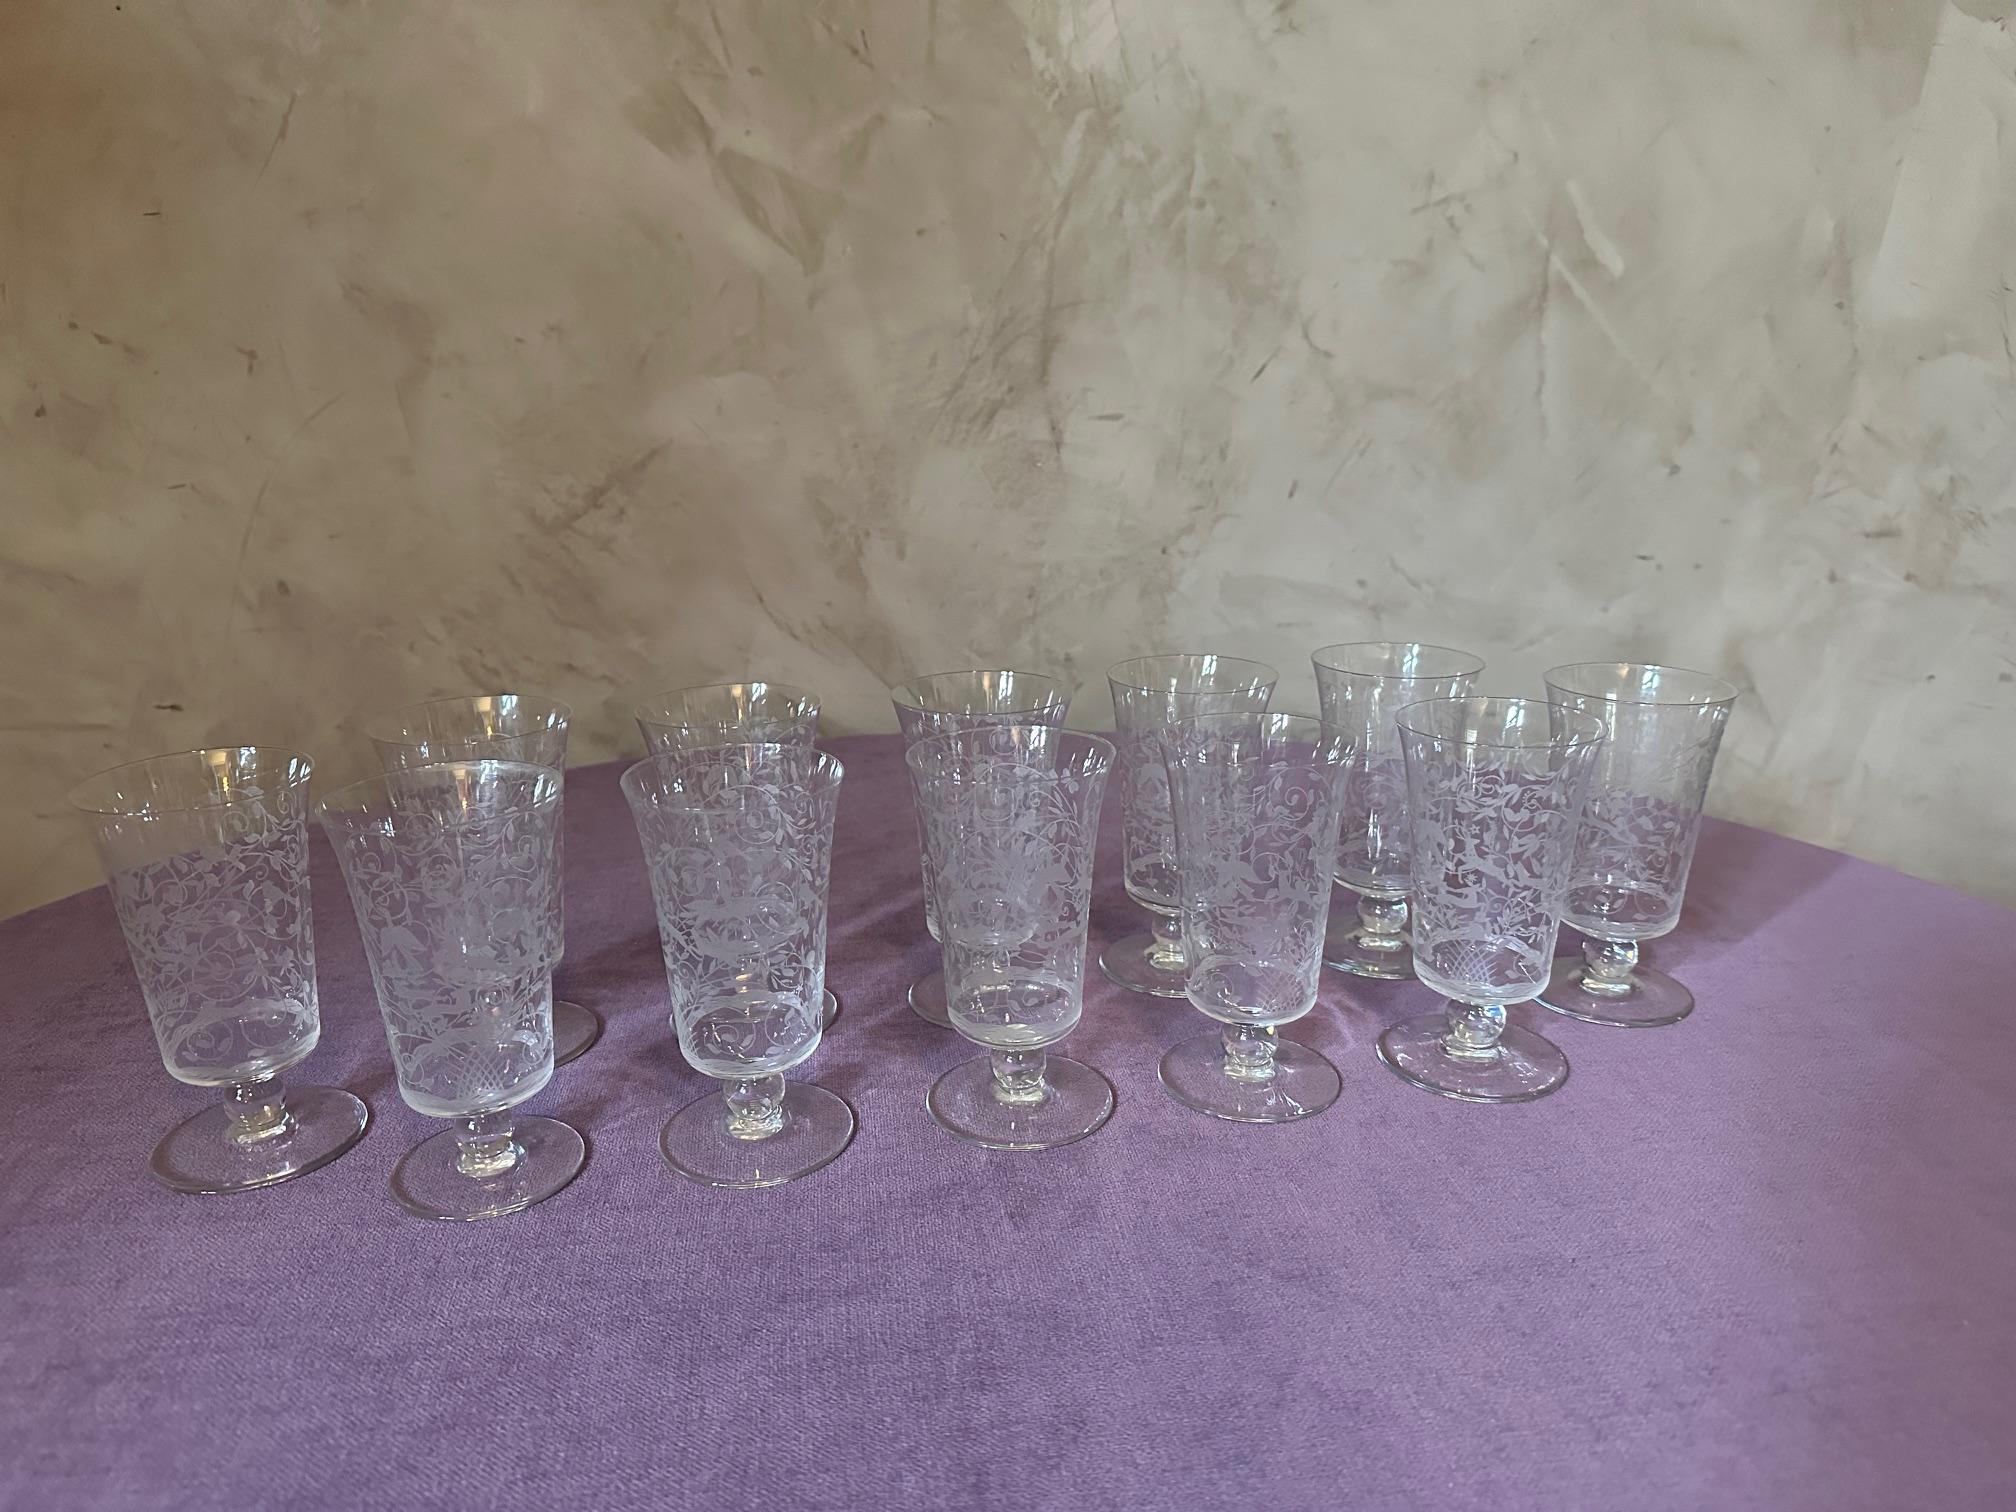 Beautiful and rare set of Baccarat crystal glasses, Jeddah model, created by Georges Chevalier (1894-1987) in 1946 and produced until 1970.
- 12 water glasses
- 12 wine glasses
- 12 champagne flutes
- 17 liqueur glasses
- 1 carafe
- 1